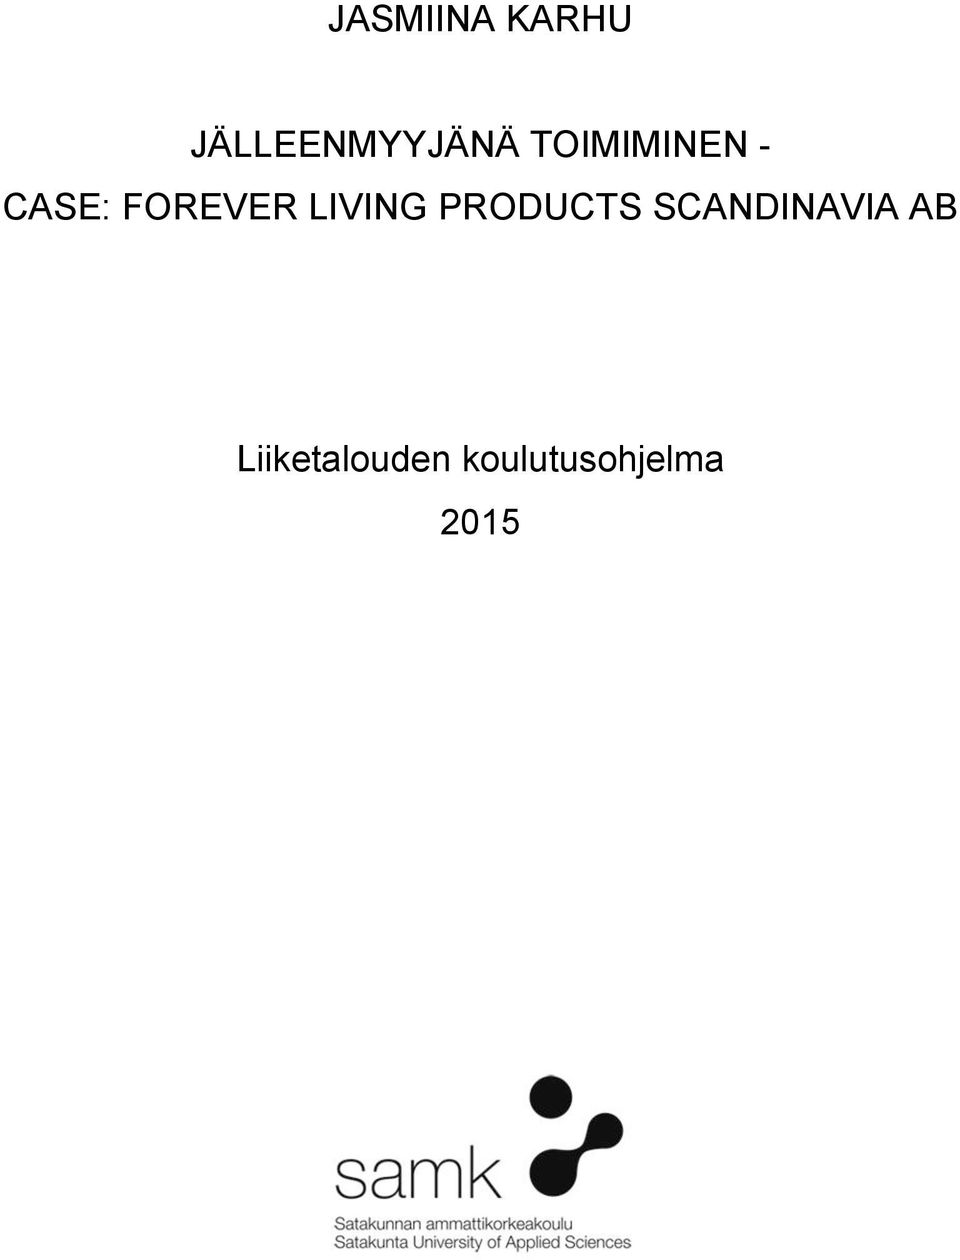 LIVING PRODUCTS SCANDINAVIA AB